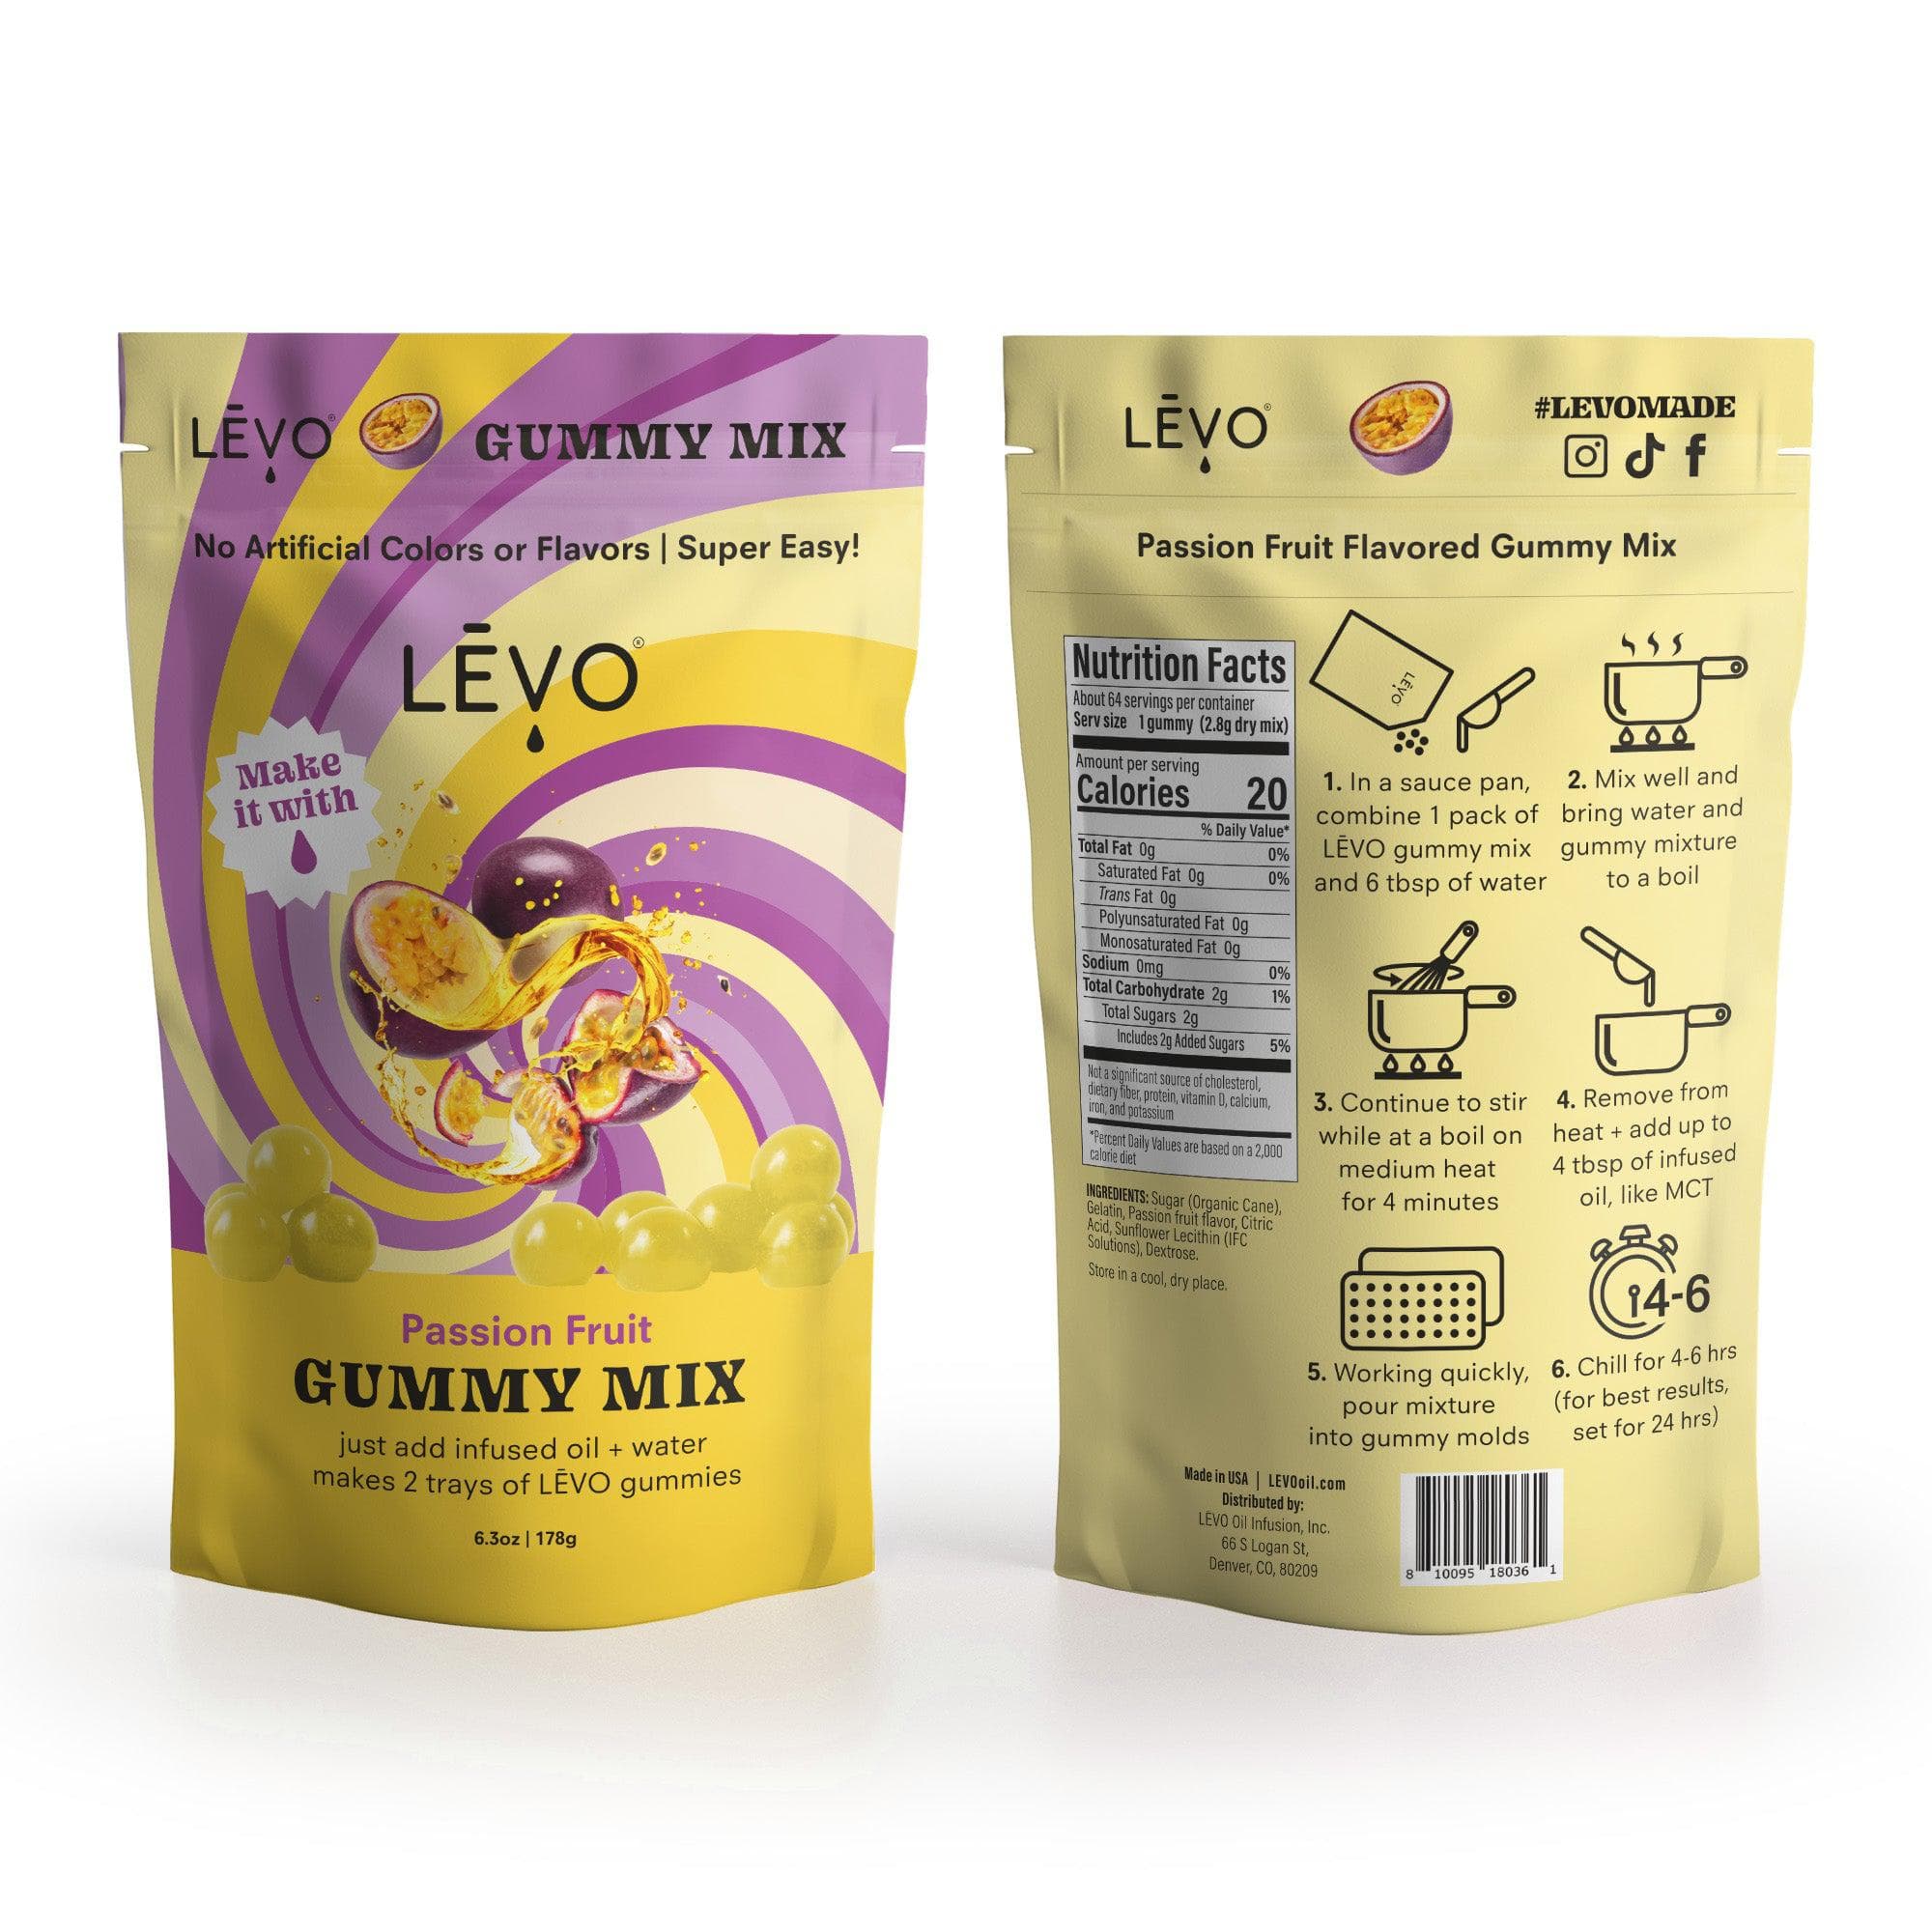 LEVO gummy mix Passion Fruit flavored limited edition